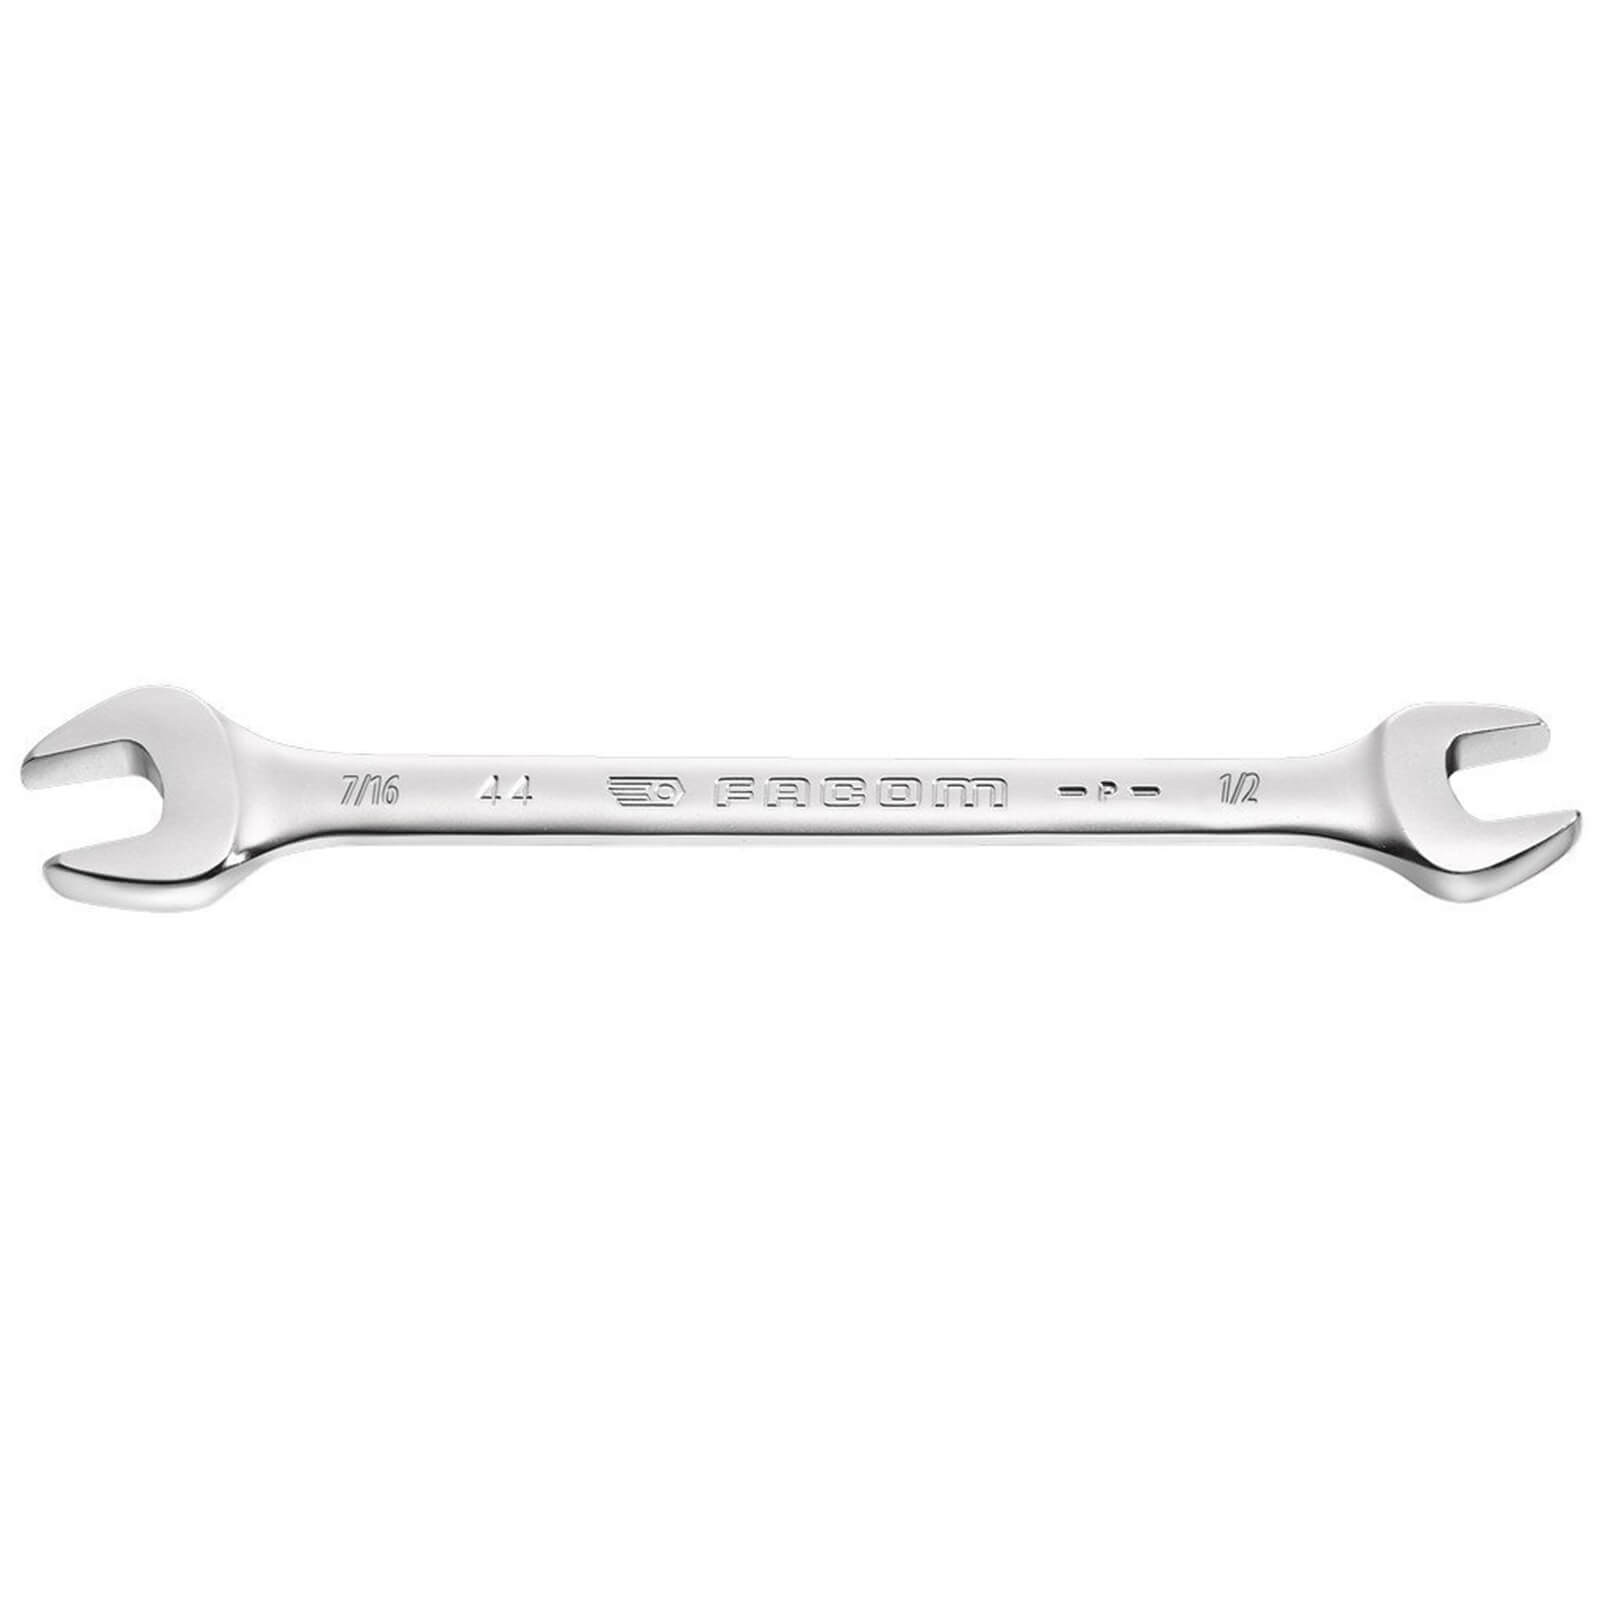 Image of Facom Open Ended Spanner Imperial 5/16" x 3/8"